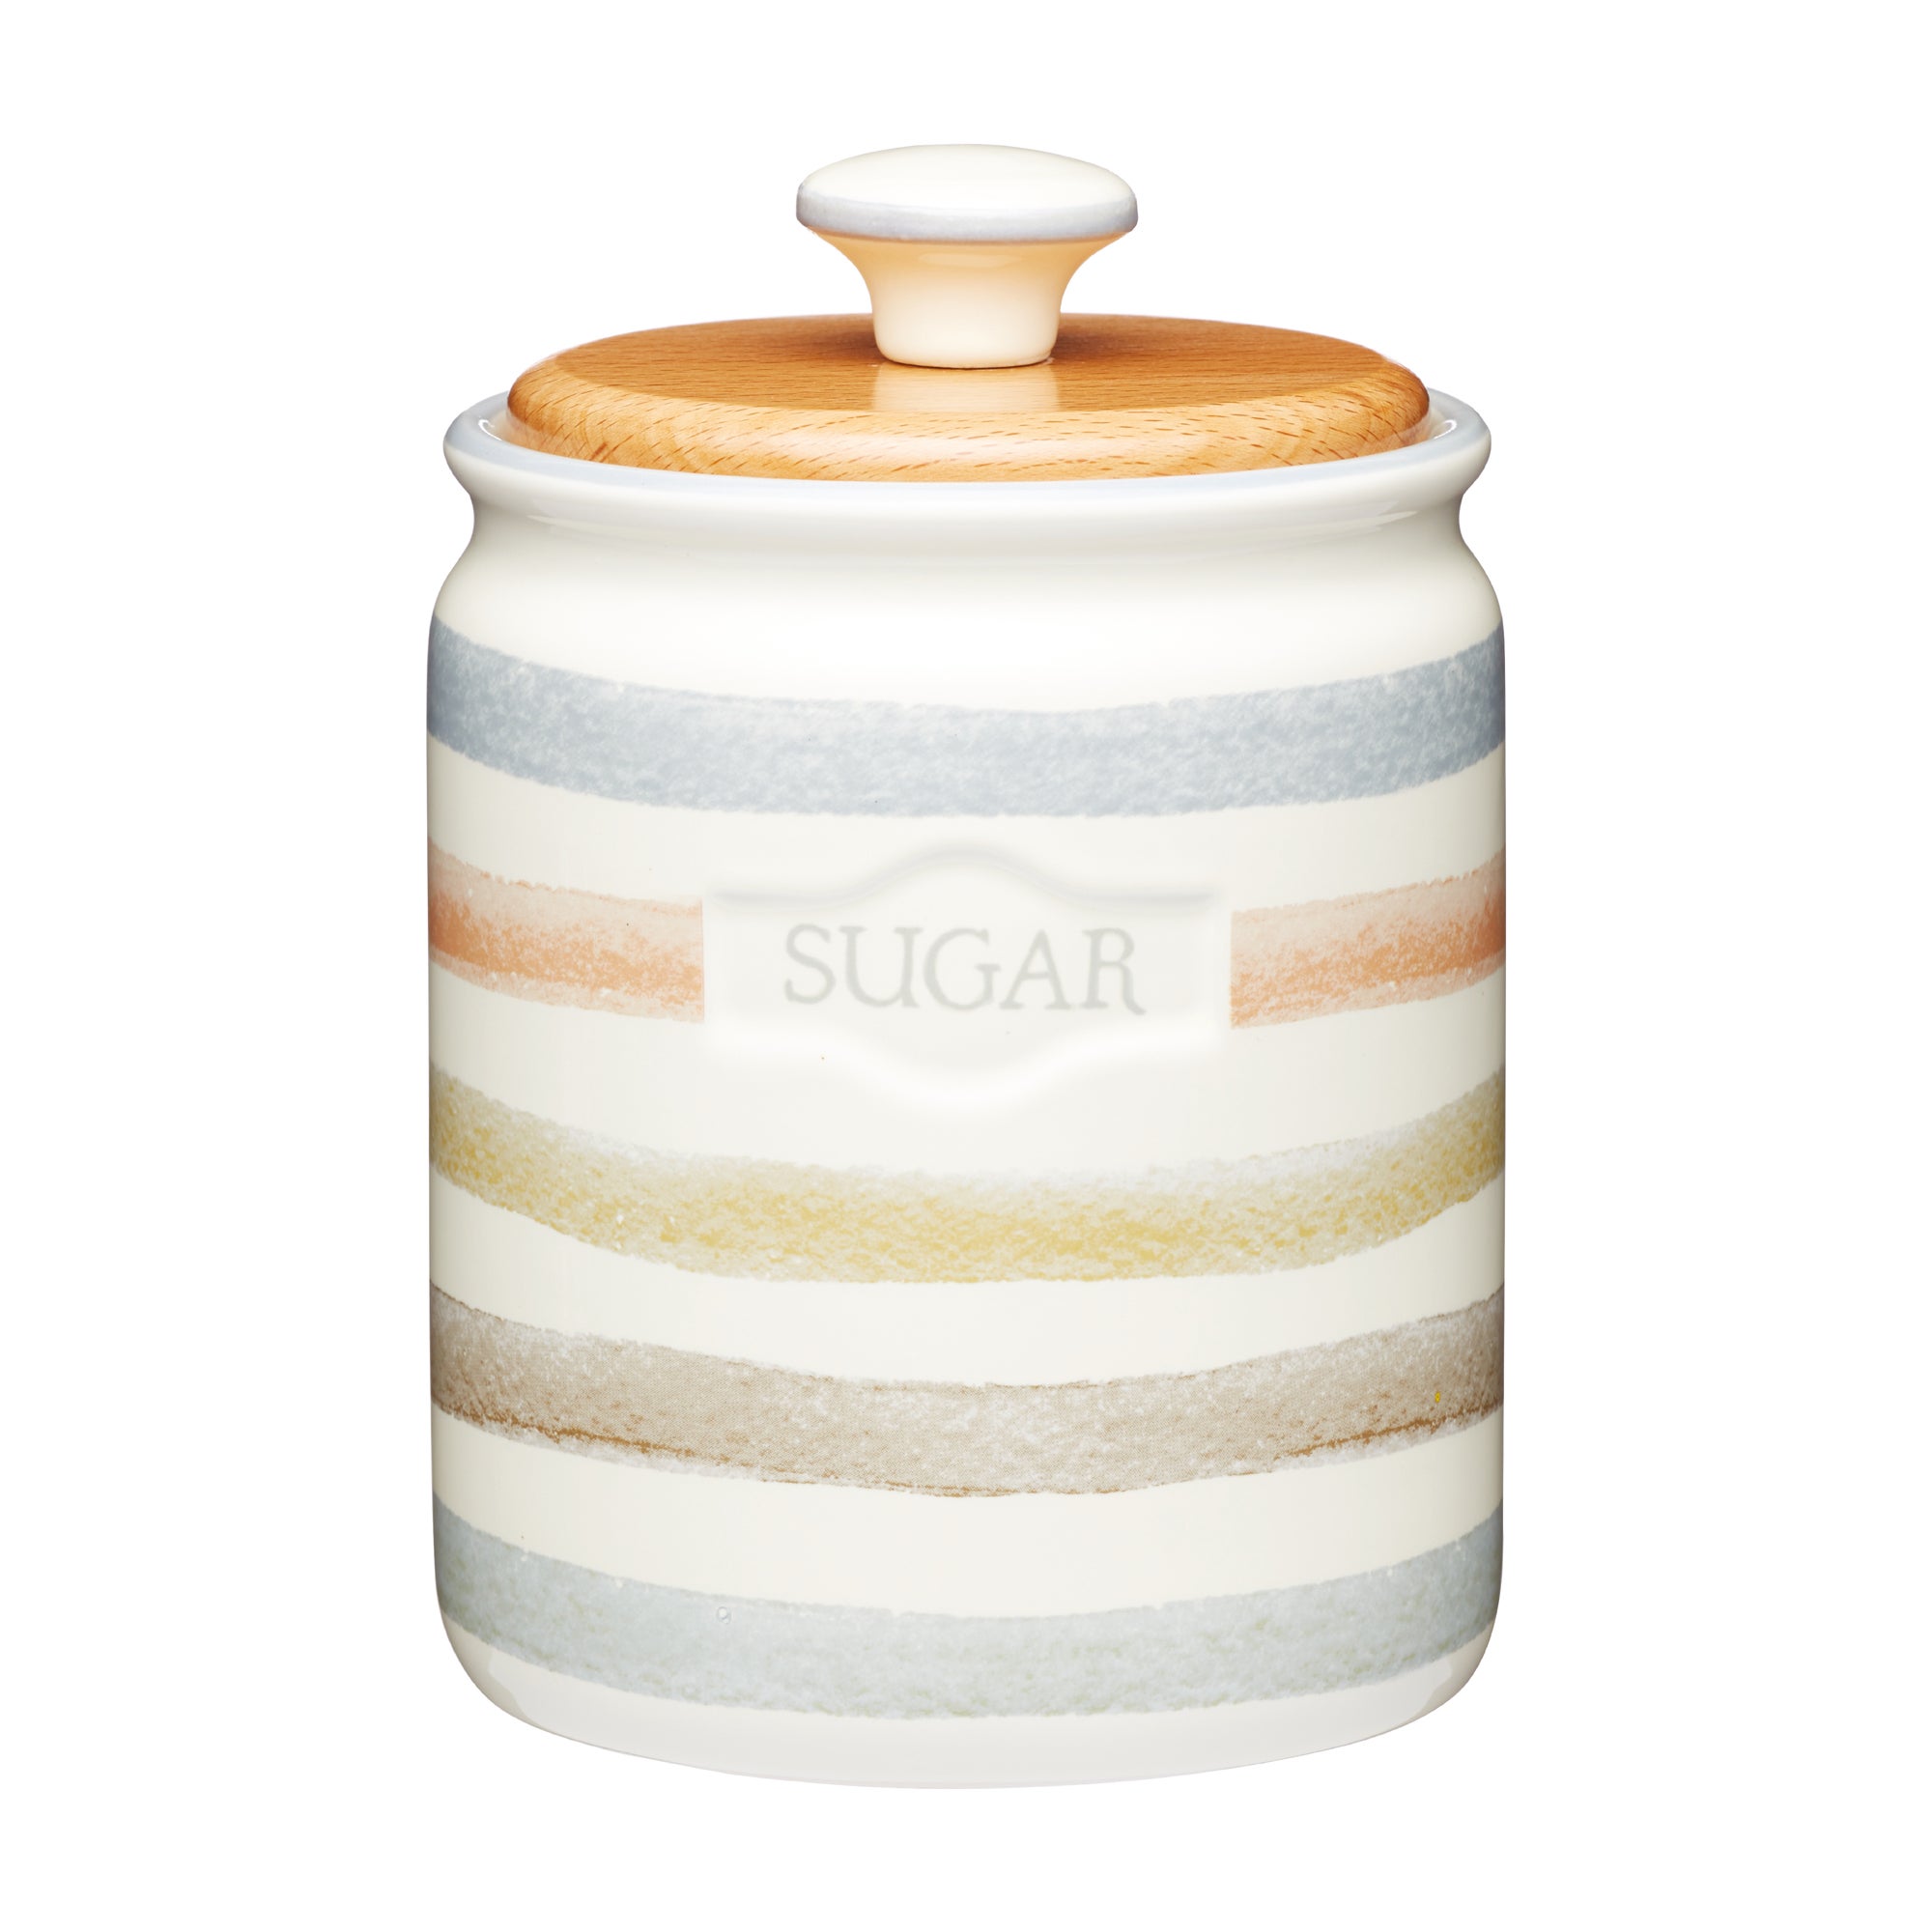 Image of KitchenCraft Ceramic Sugar Canister Blue, Brown and White